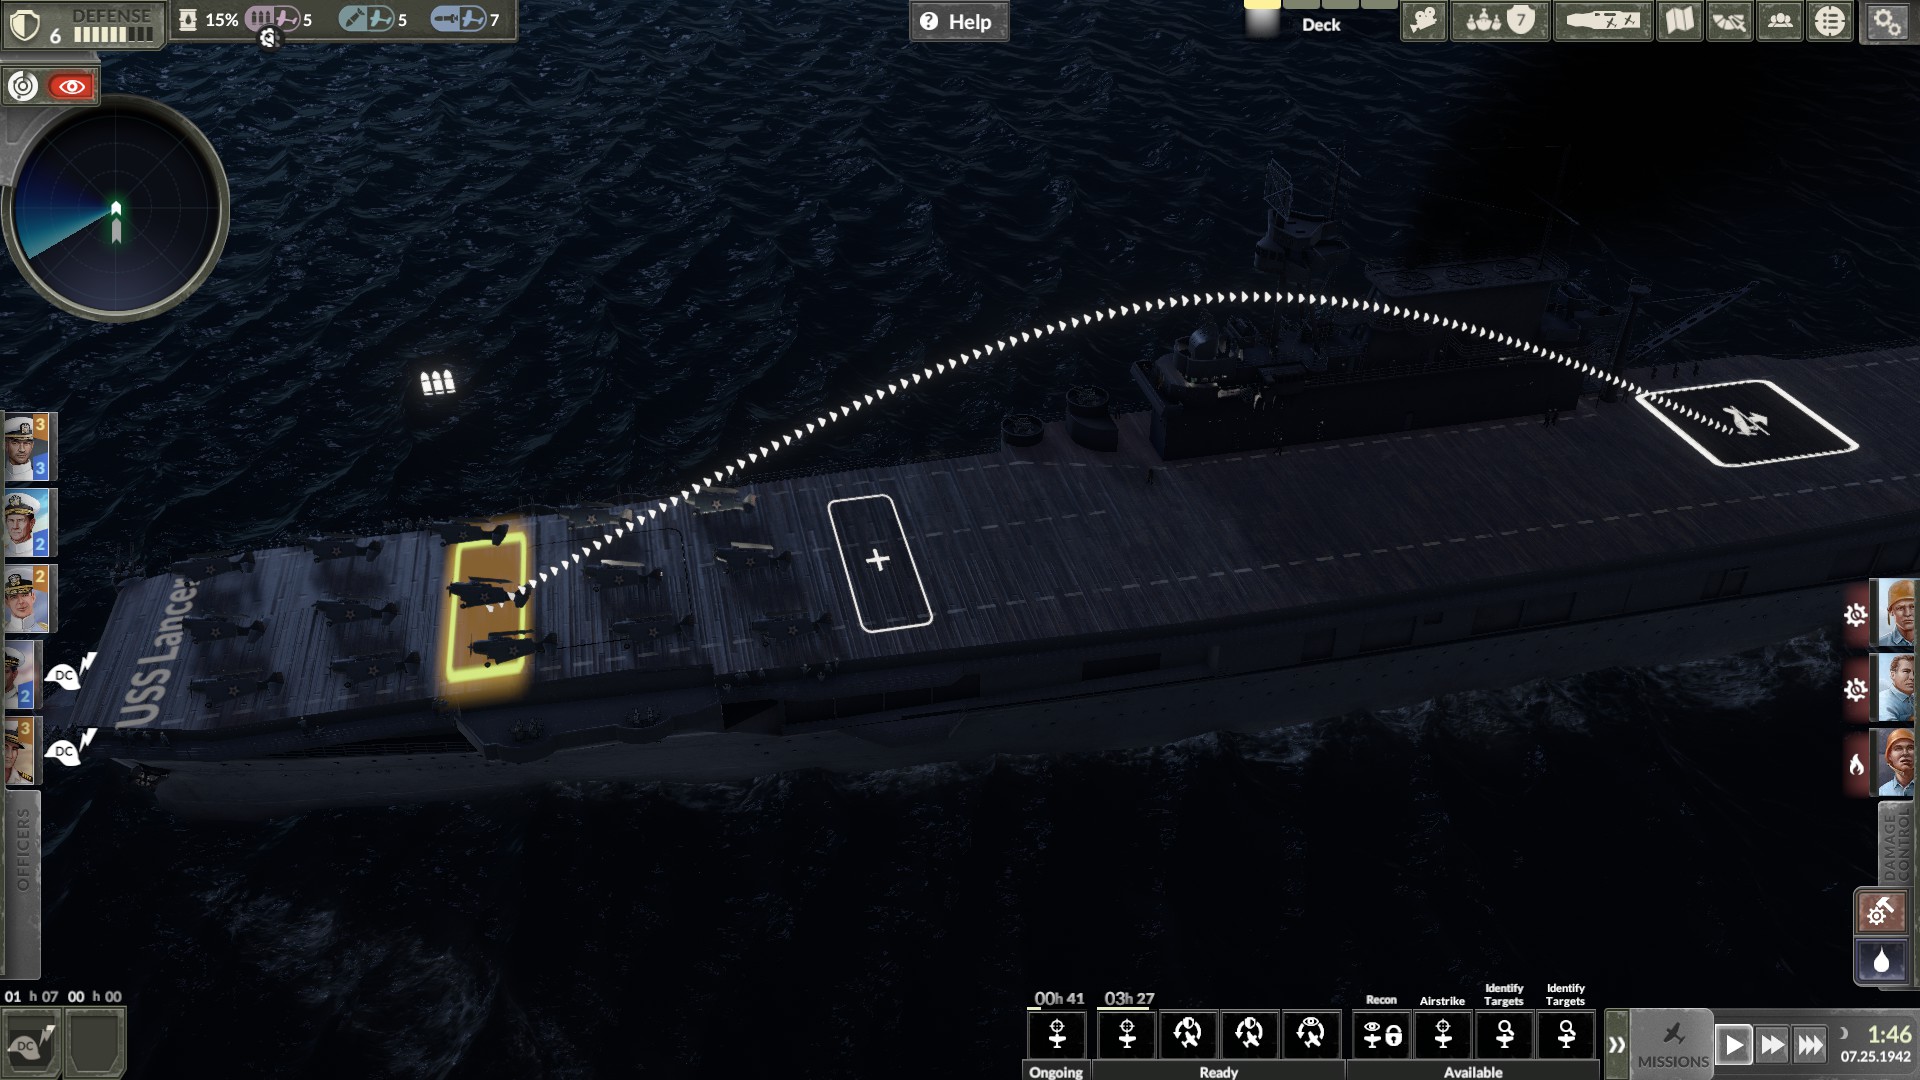 Aircraft Carrier Survival - Deck Management Guide - Effective Squadron Staging - EE09F44